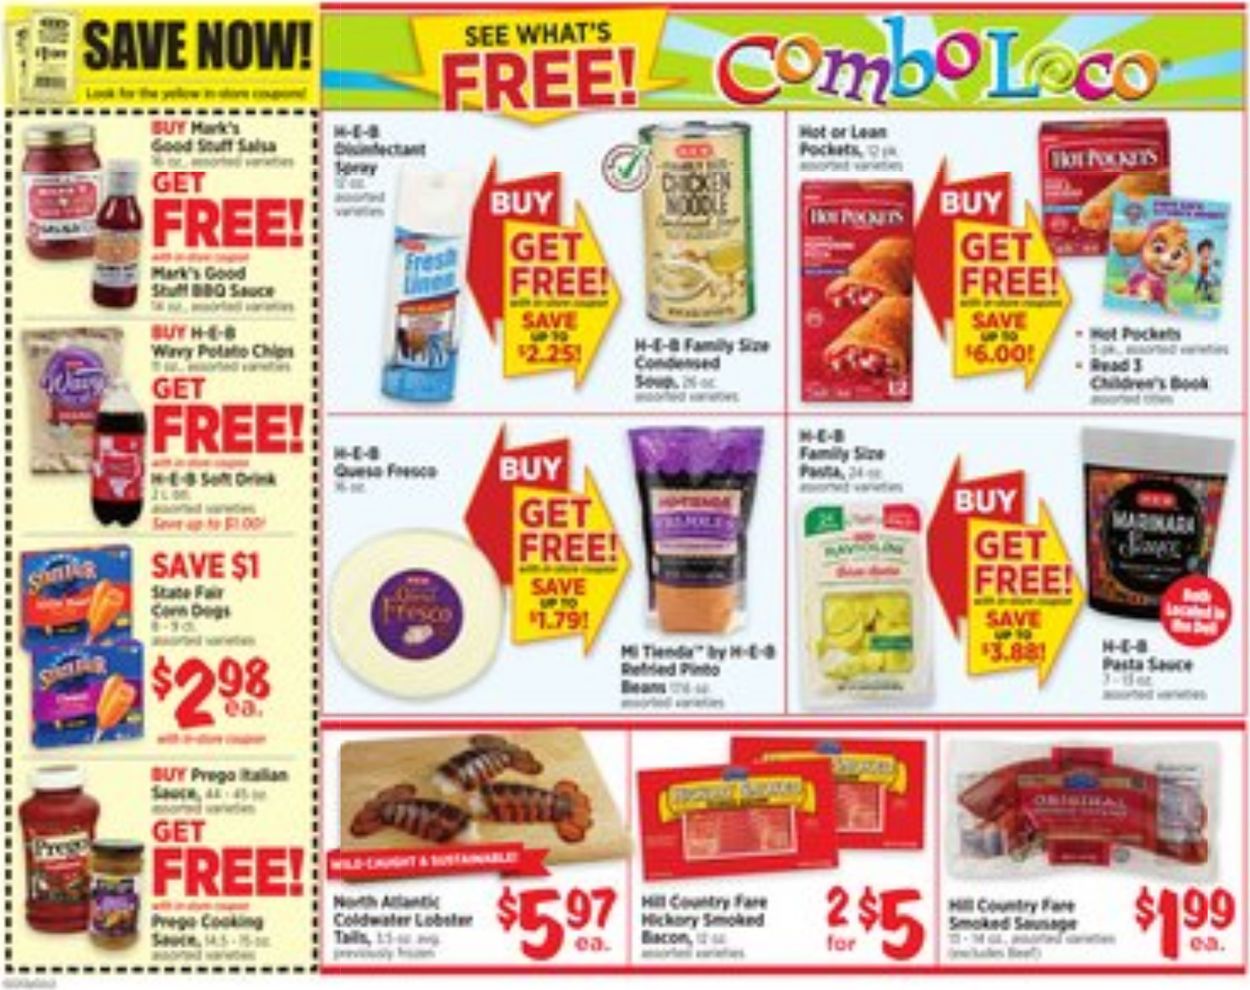 H-E-B Ad from 02/12/2020